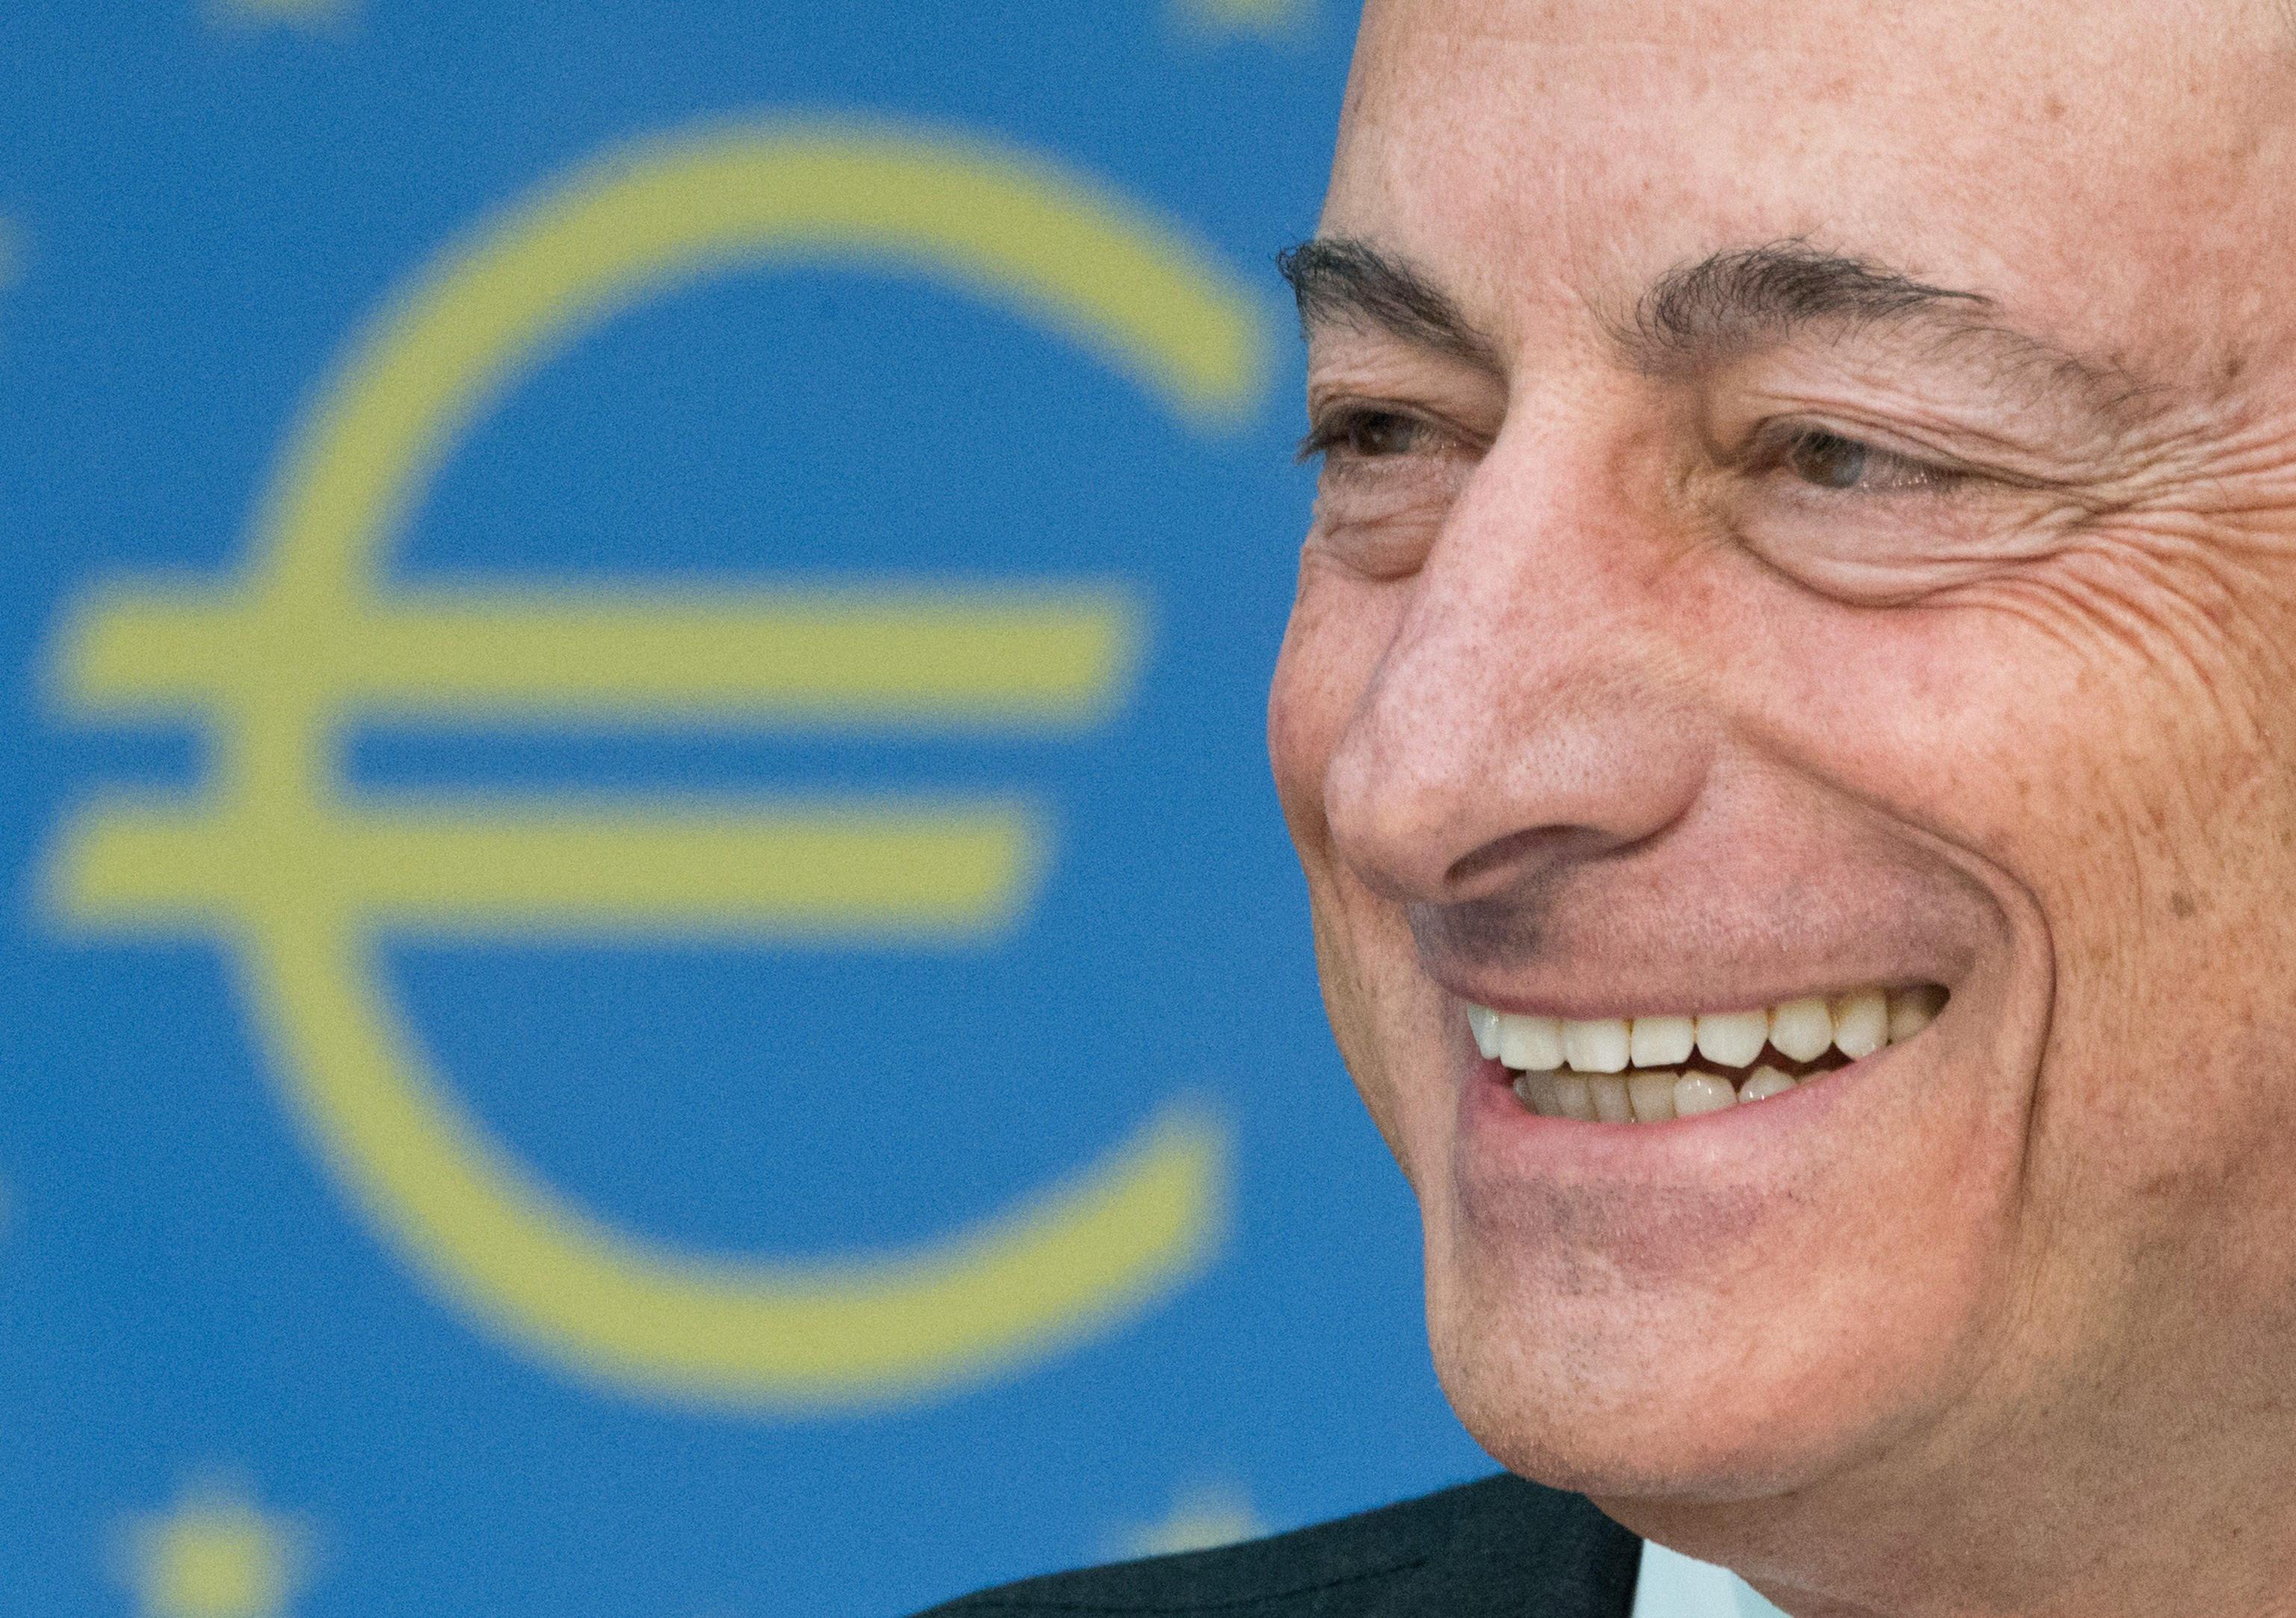 epa03809879 Mario Draghi, President of the European Central Bank (ECB), smiles during an ECB press conference in Frankfurt Main, Germany, 01 August 2013. The interest rate has remained at the record low level of 0.5 percent even though there are signs that the economy is improving in the euro zone. EPA/BORIS ROESSLER